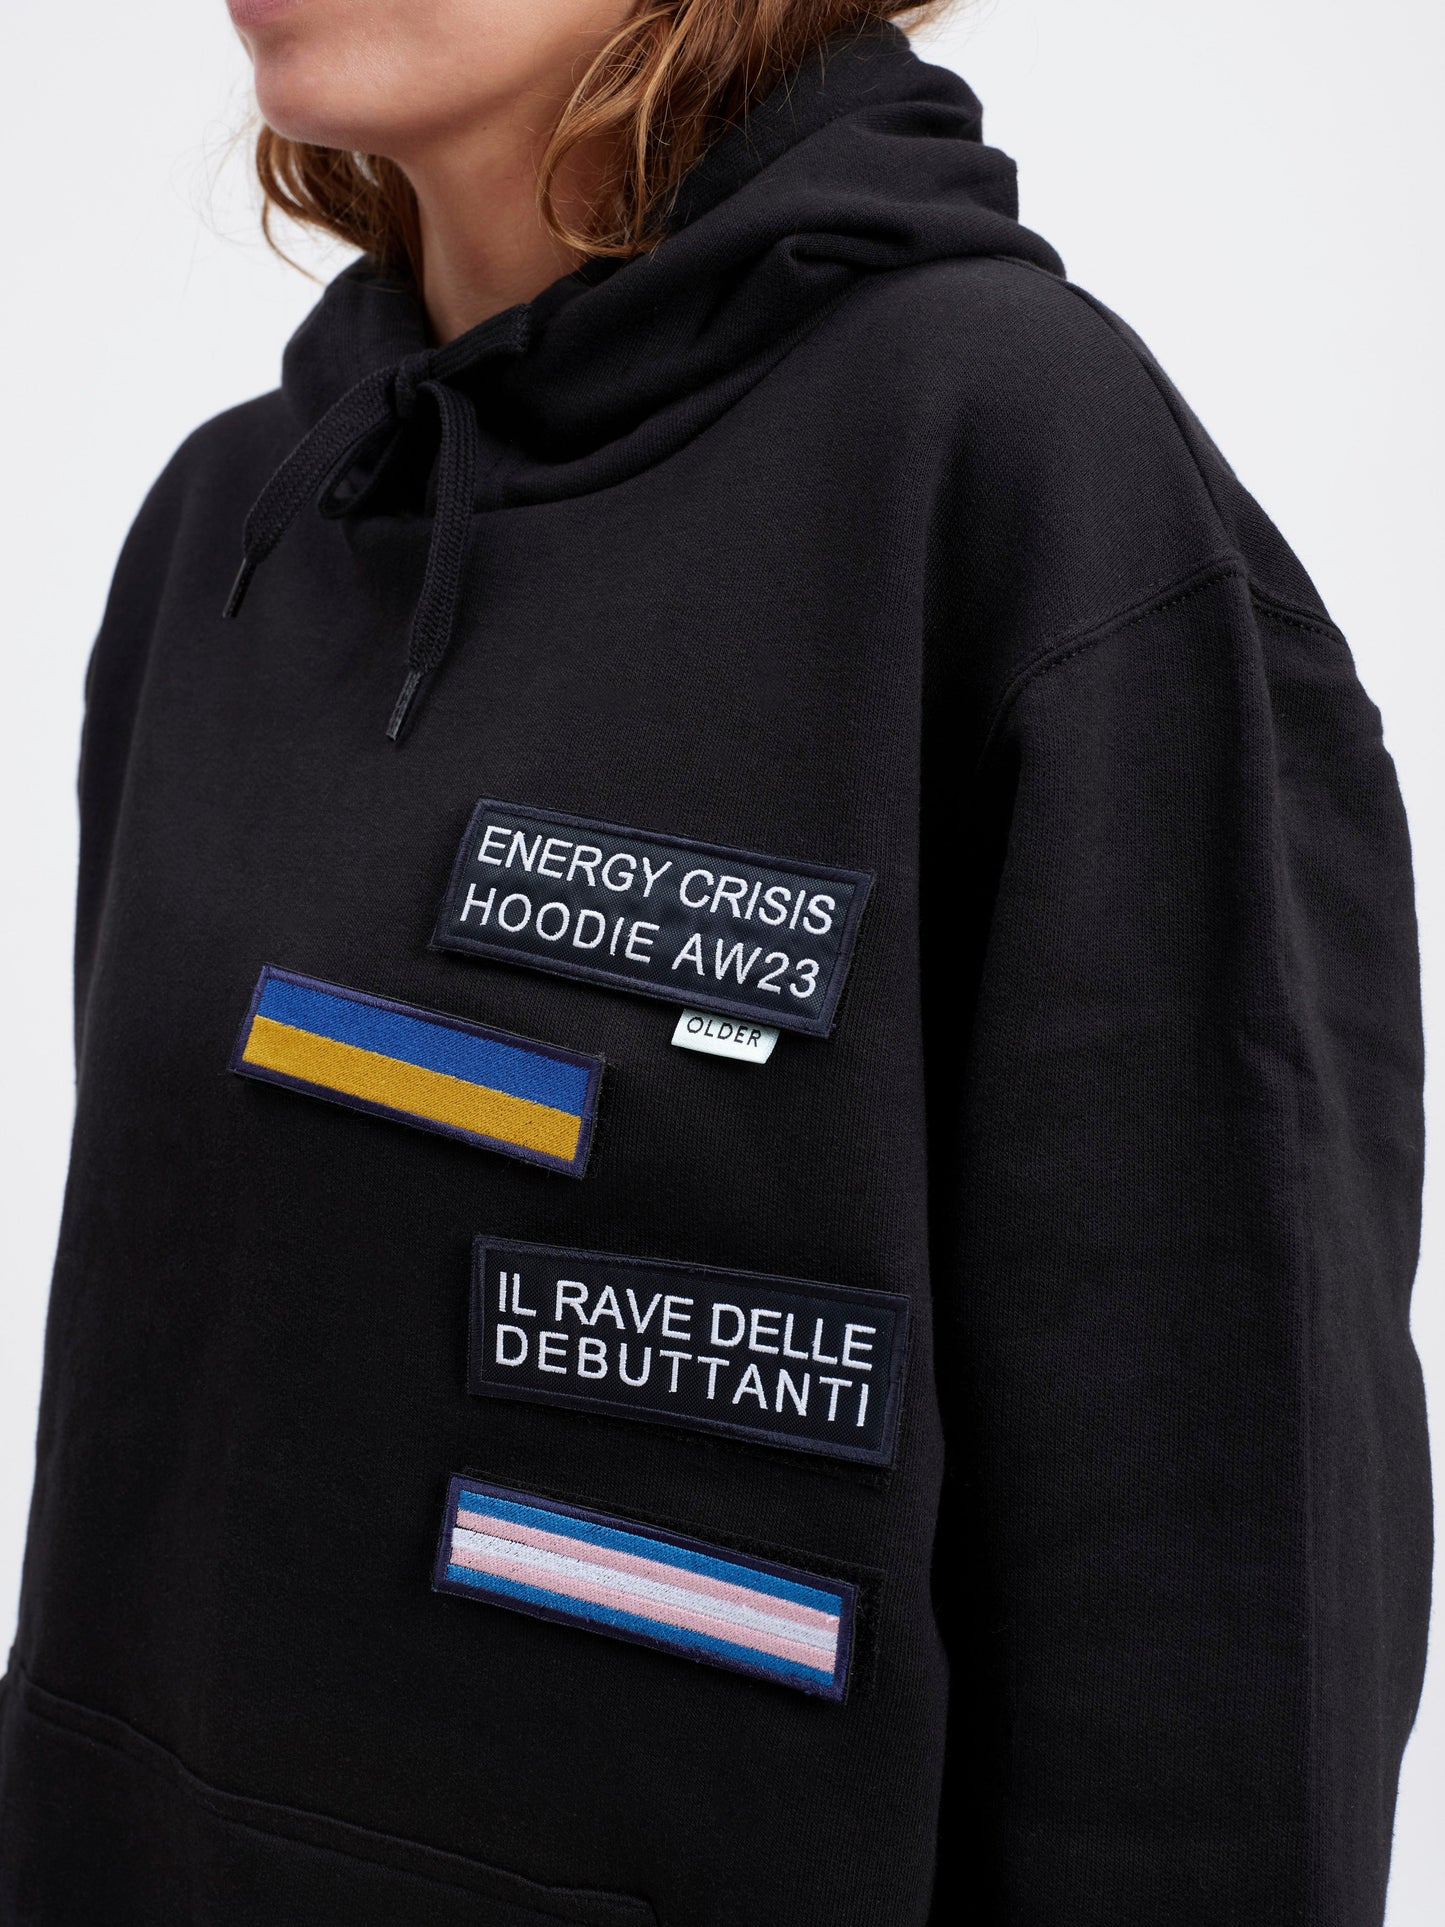 The Message Hoodie